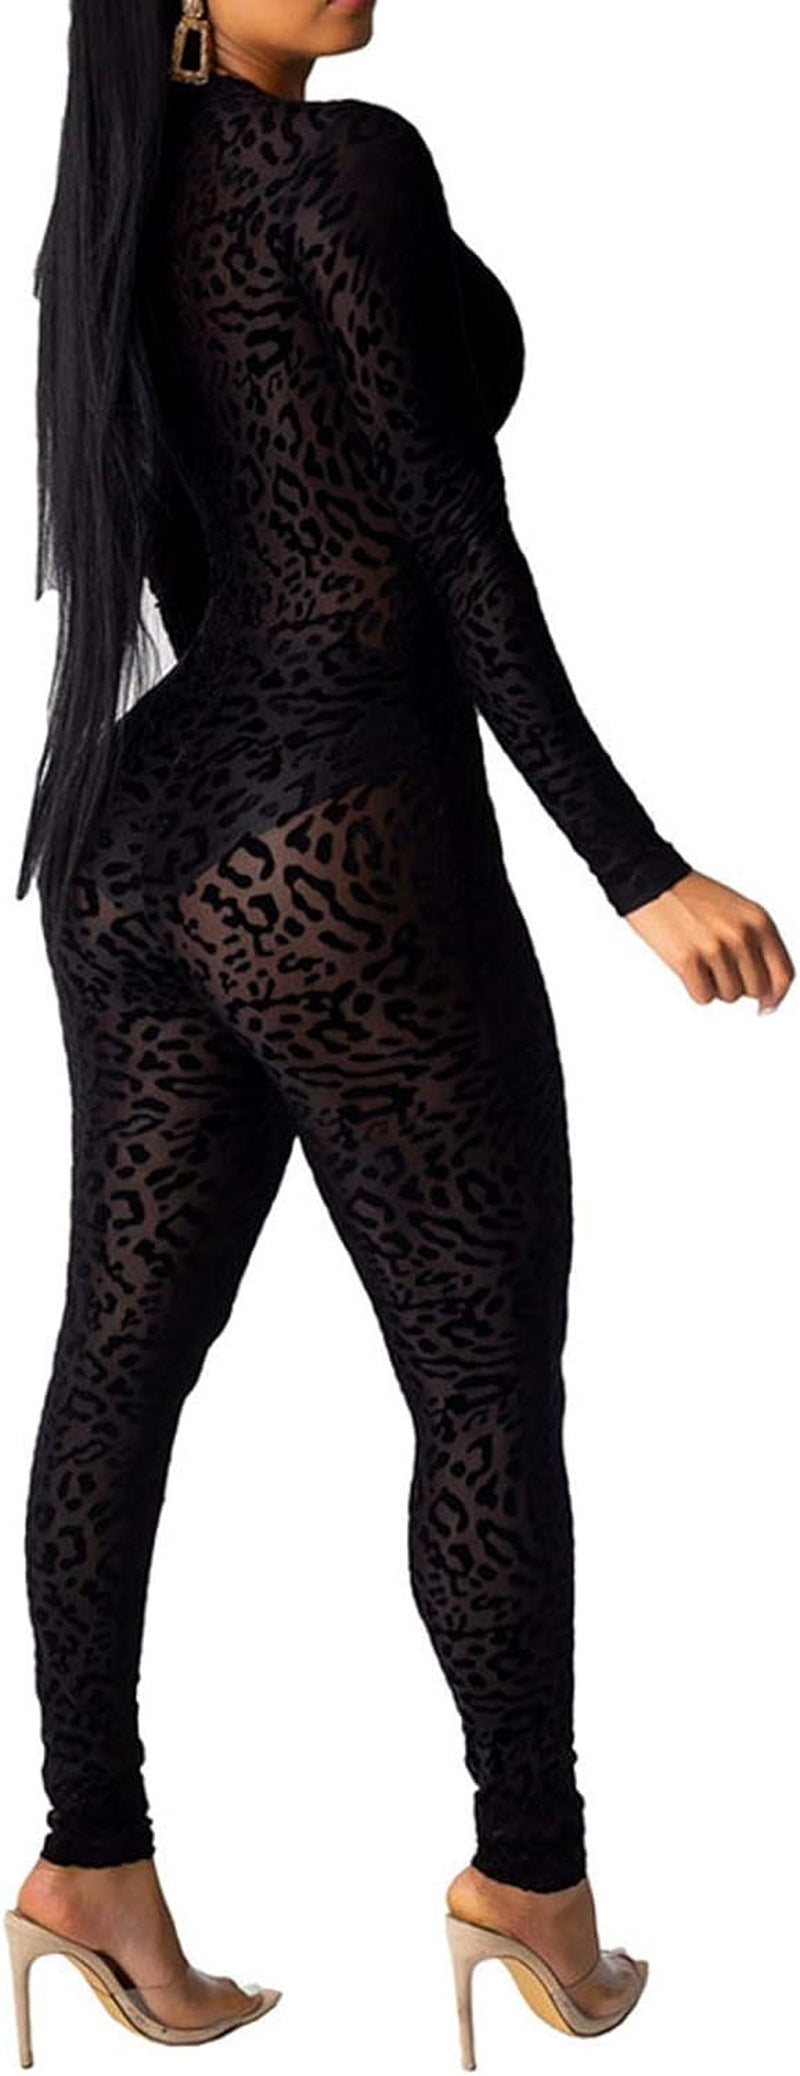 Women See through Bodycon Jumpsuit - One Piece Deep V Neck Outfits Sheer Mesh Leopard Clubwear Jumpsuit Rompers